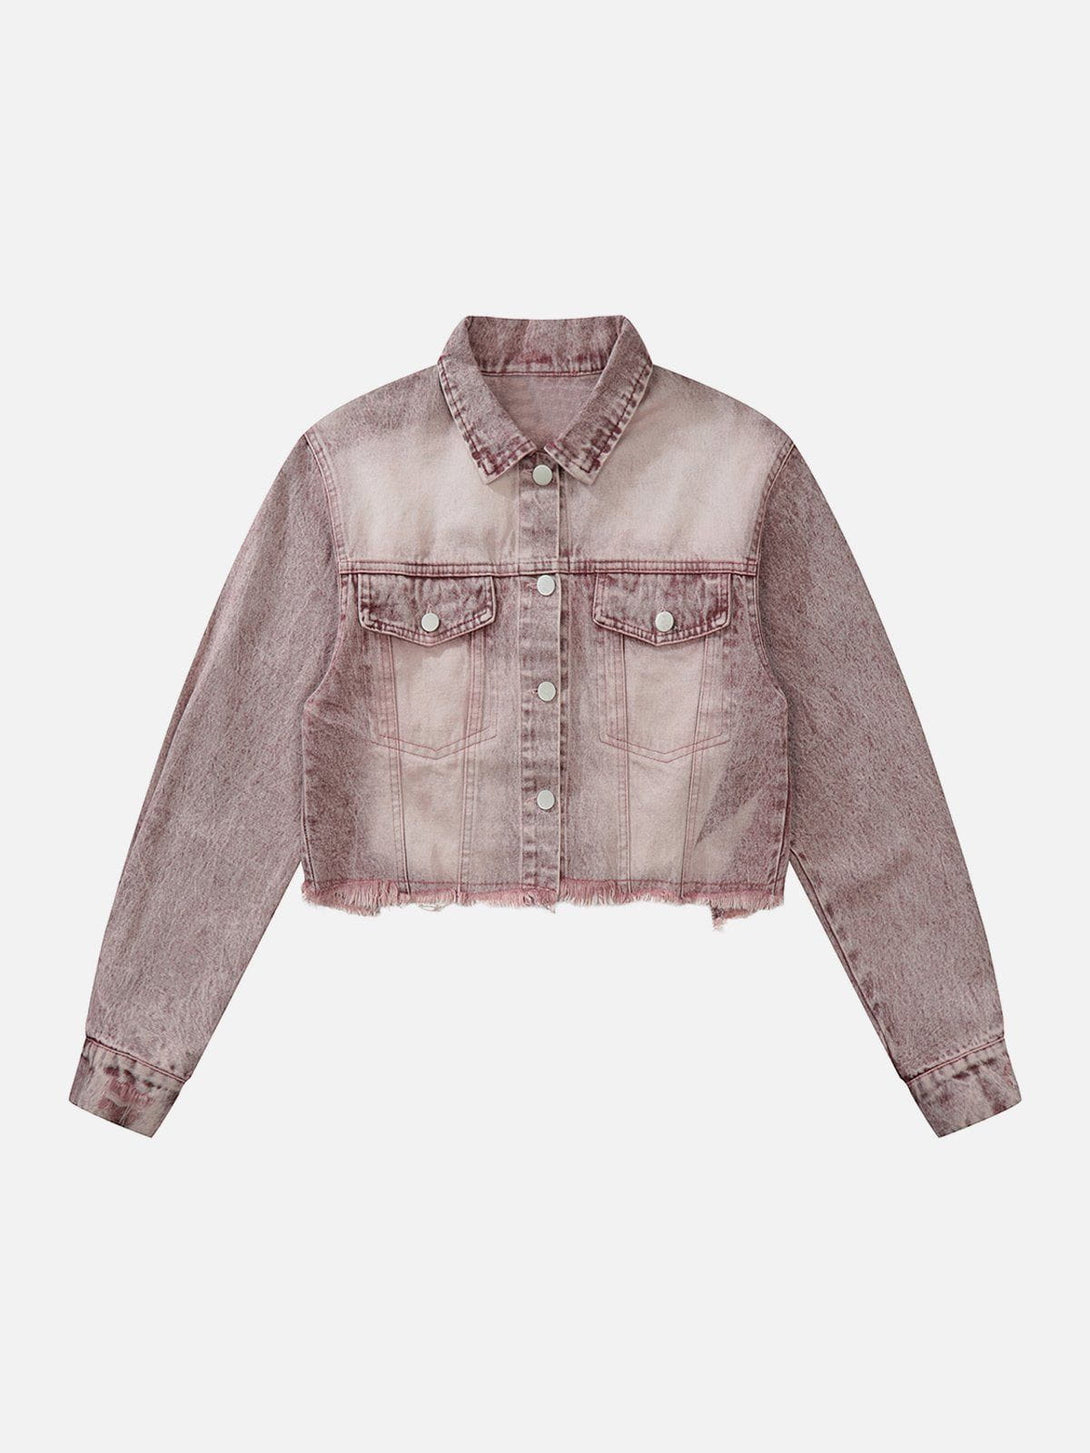 Levefly - Hollow Out Patchwork Jacket - Streetwear Fashion - levefly.com